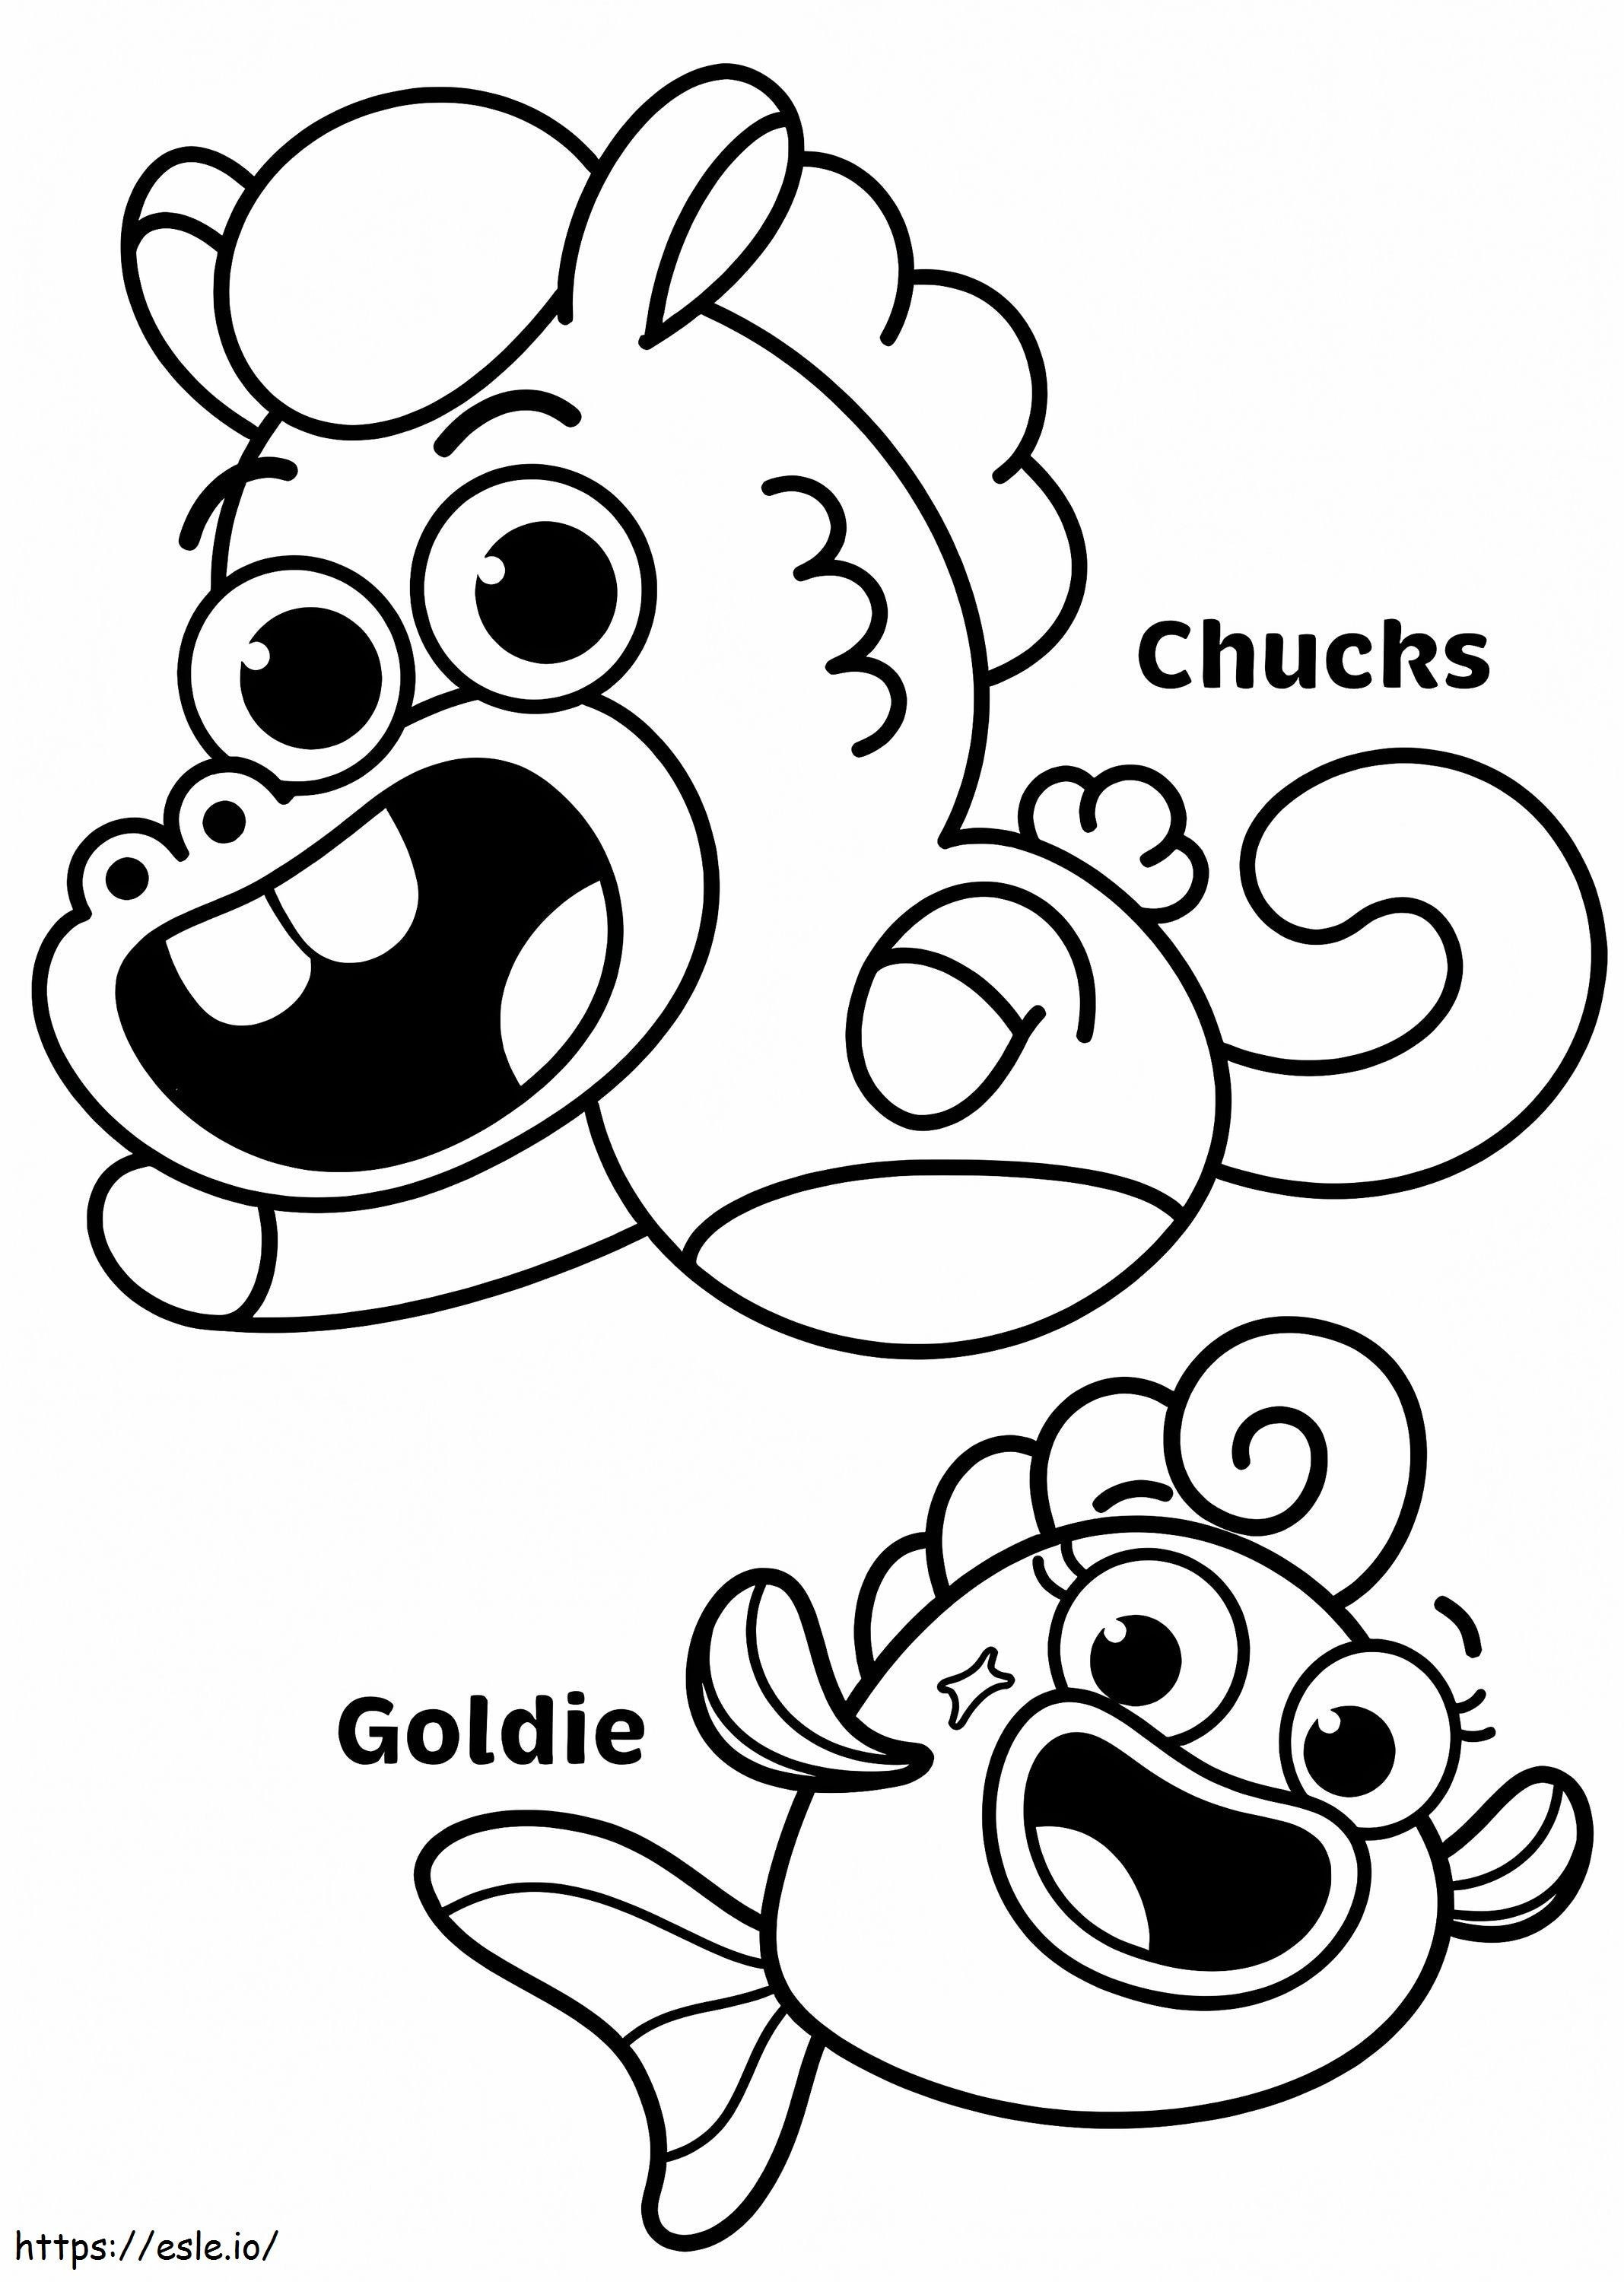 Chunks And Goldie From Baby Shark coloring page